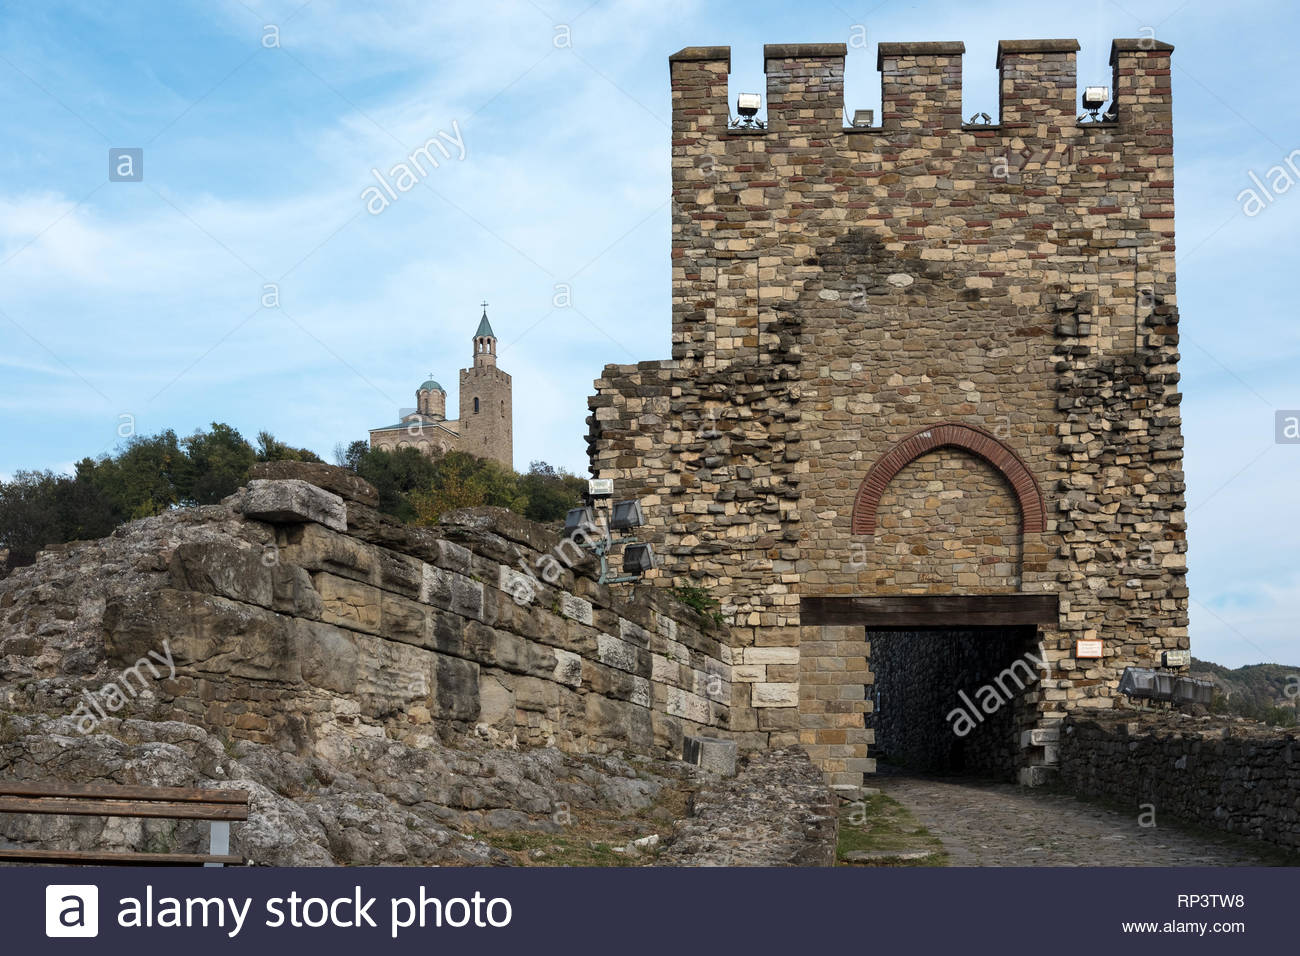 Over Centuries Of Use Stone Entrance To Tsarevets Fortress In